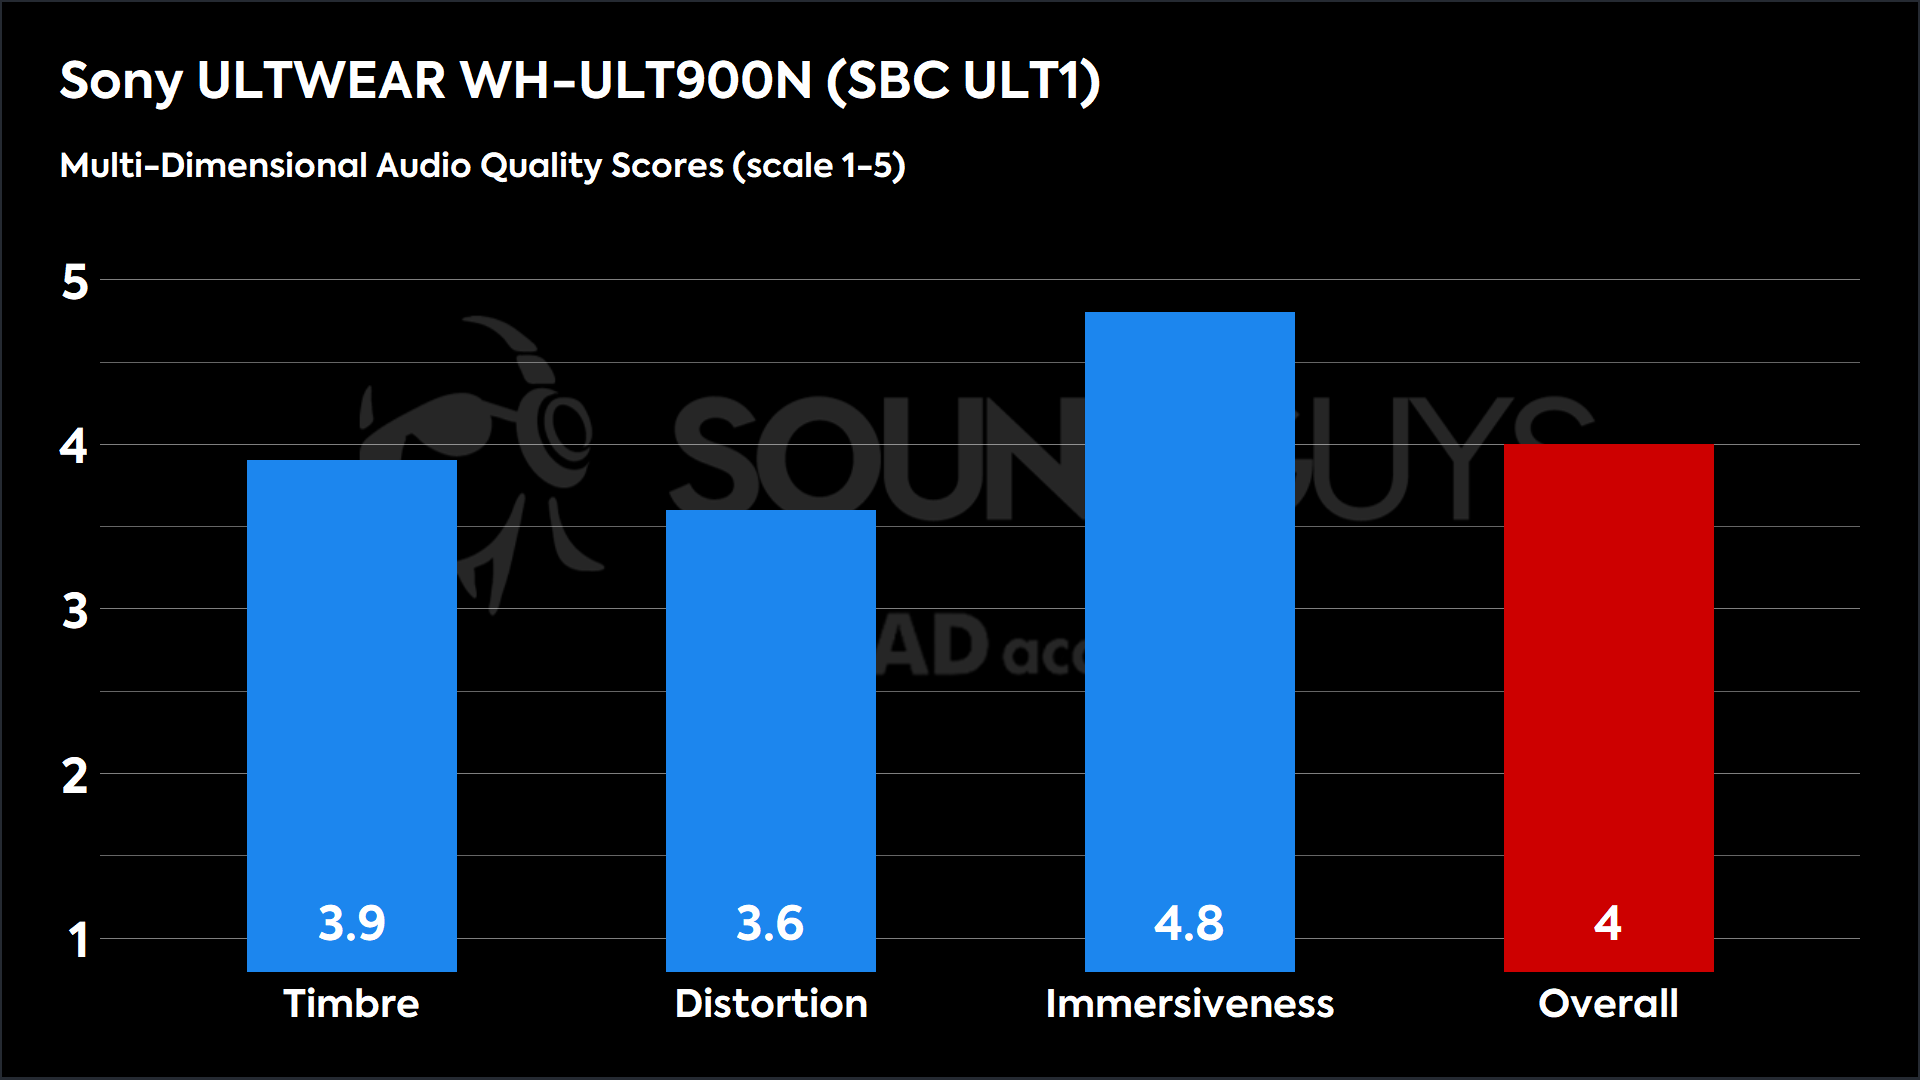 This chart shows the MDAQS results for the Sony ULTWEAR WH-ULT900N in SBC ULT1 mode. The Timbre score is 3.9, The Distortion score is 3.6, the Immersiveness score is 4.8, and the Overall Score is 4).